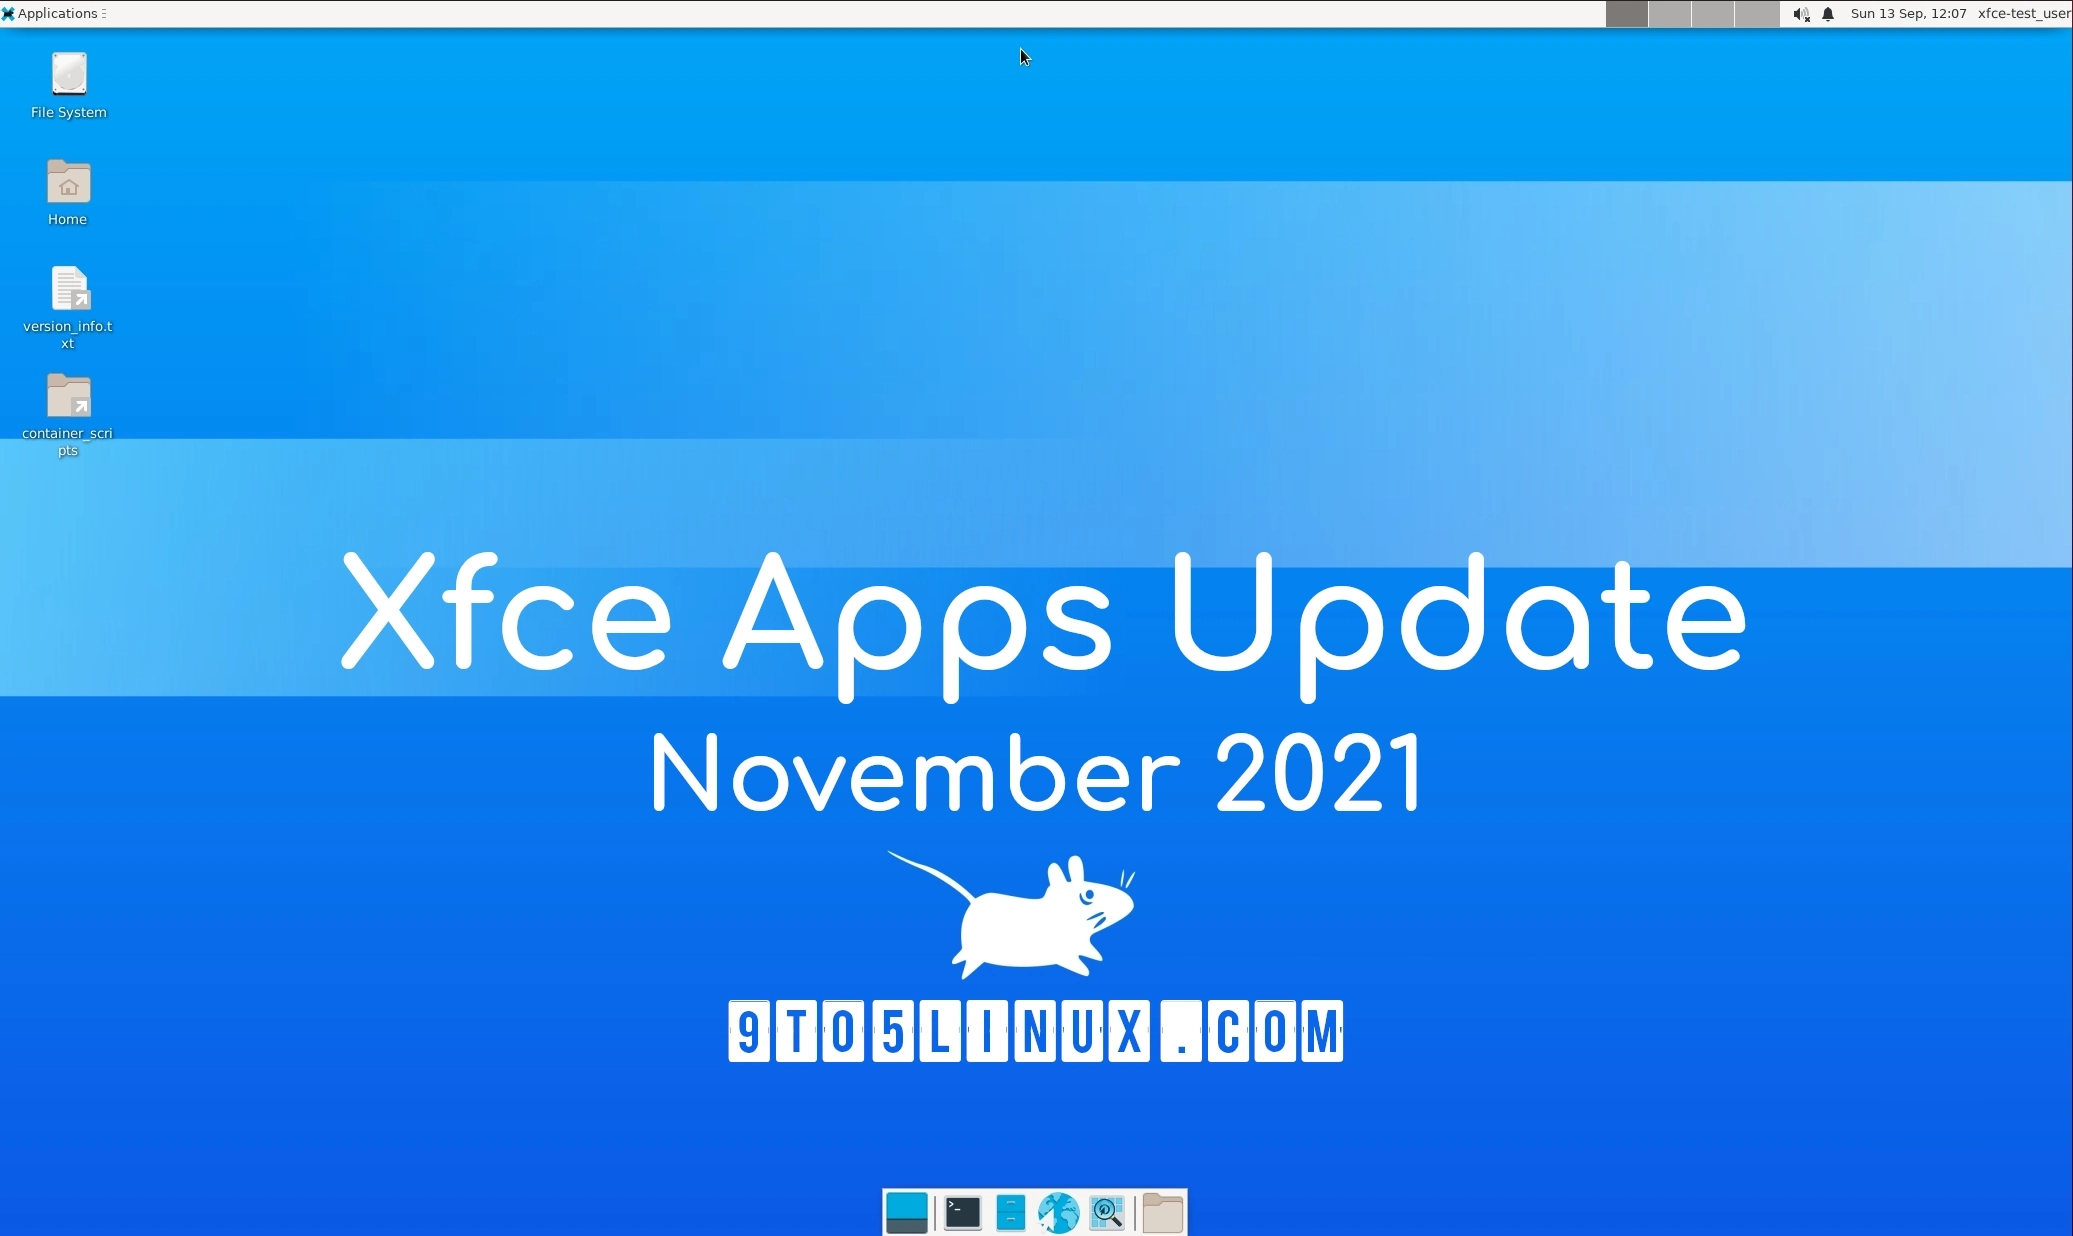 Xfce’s Apps Update for November 2021: New Releases of Mousepad, Ristretto, and Whisker Menu